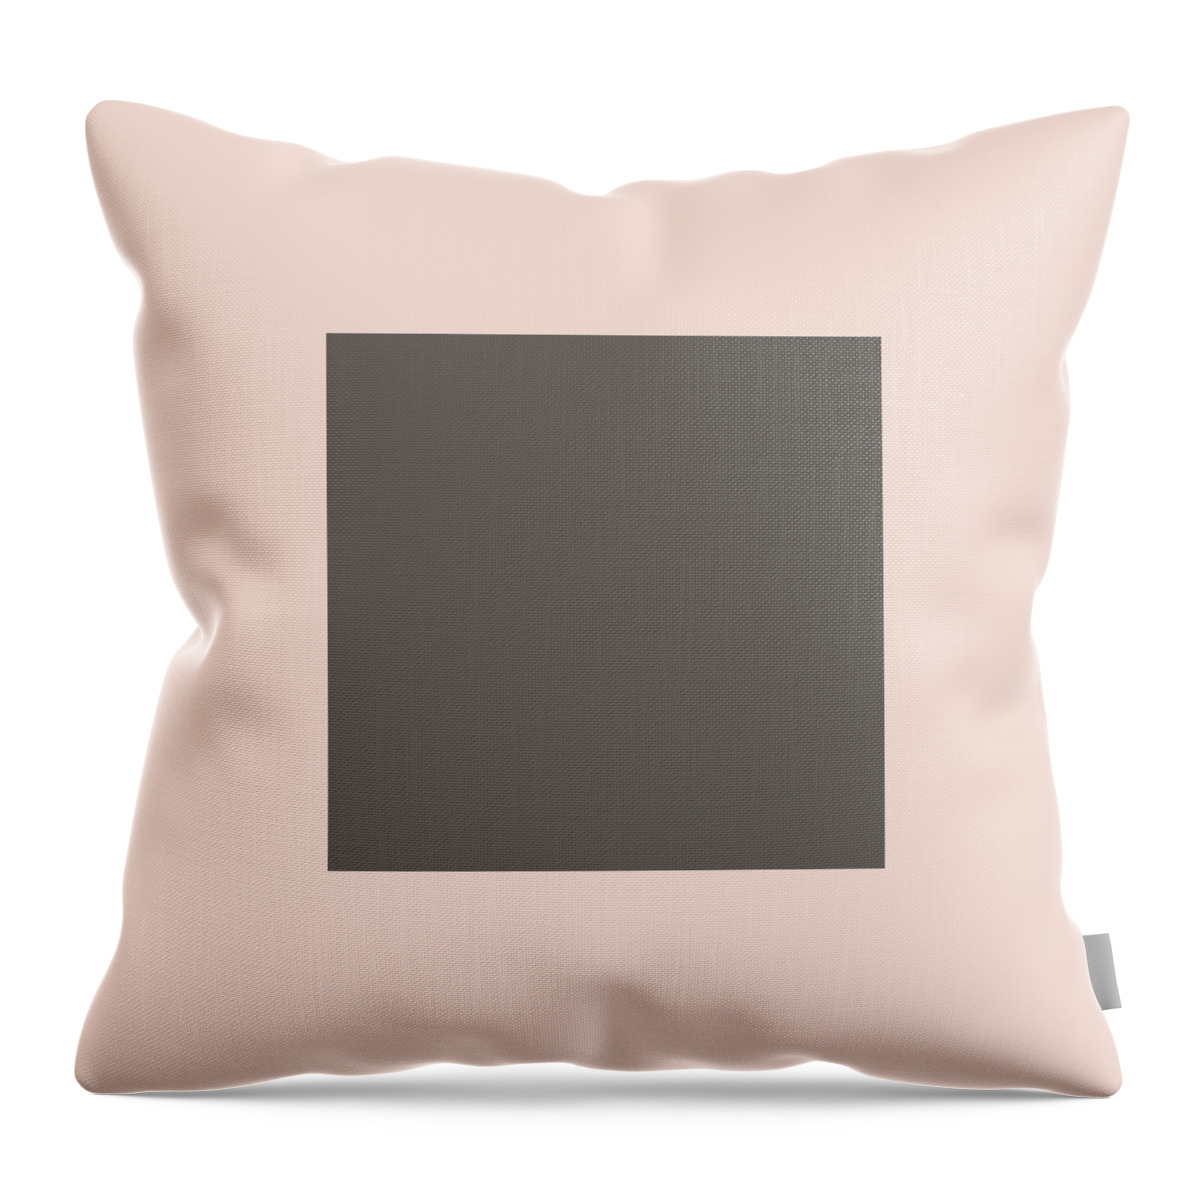 Solid Throw Pillow featuring the digital art Solid Gray for Matching Home Decor Pillows and Blankets by Delynn Addams